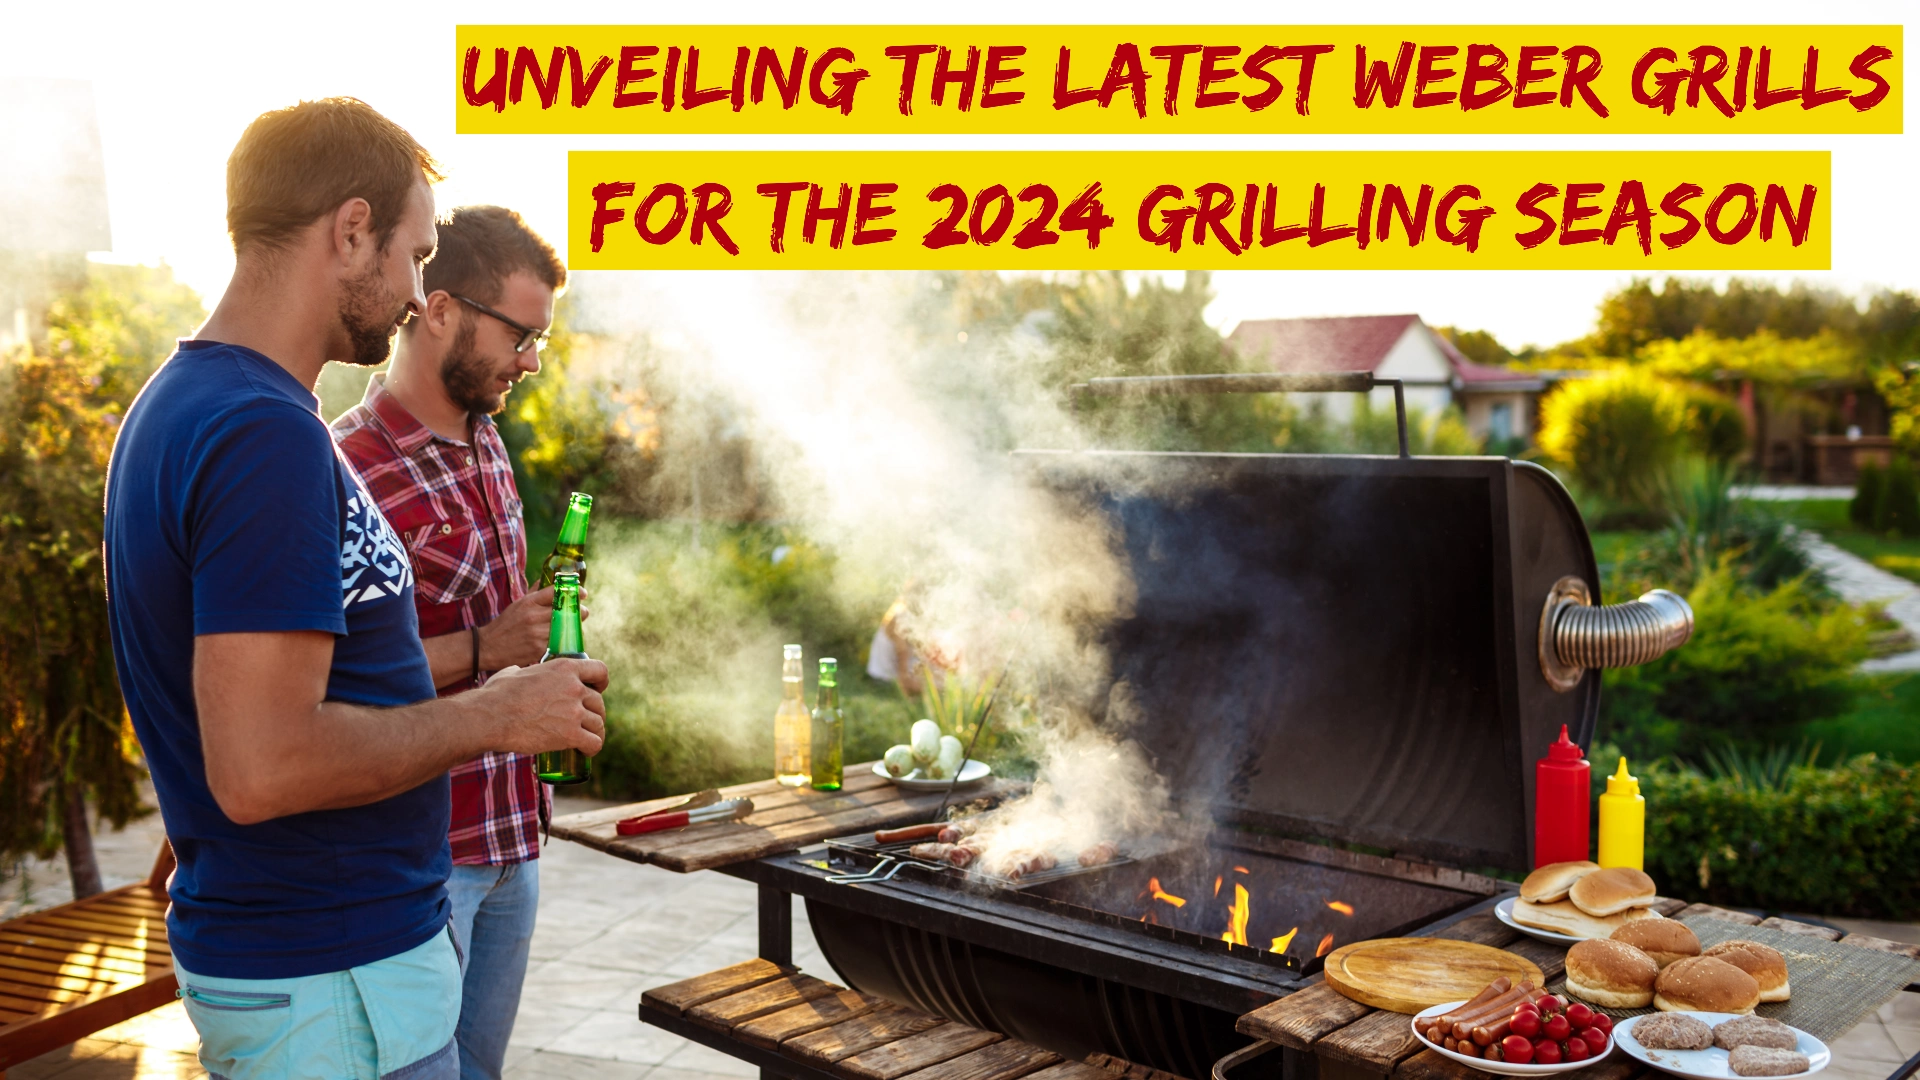 Unveiling the Latest Weber Grills for the 2024 Grilling Season